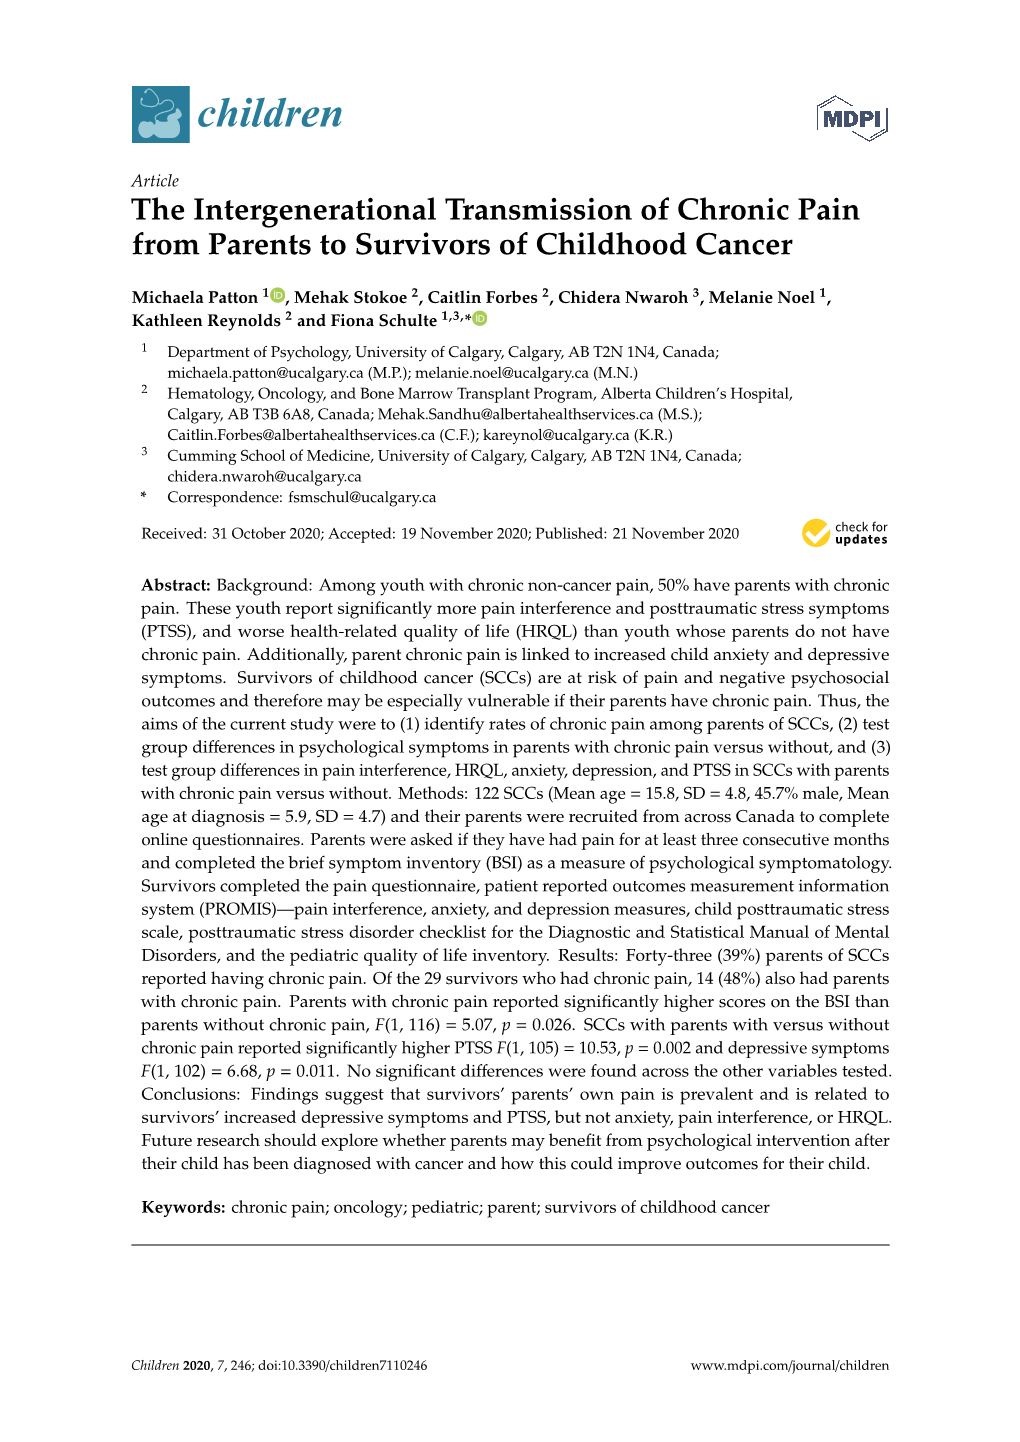 The Intergenerational Transmission of Chronic Pain from Parents to Survivors of Childhood Cancer